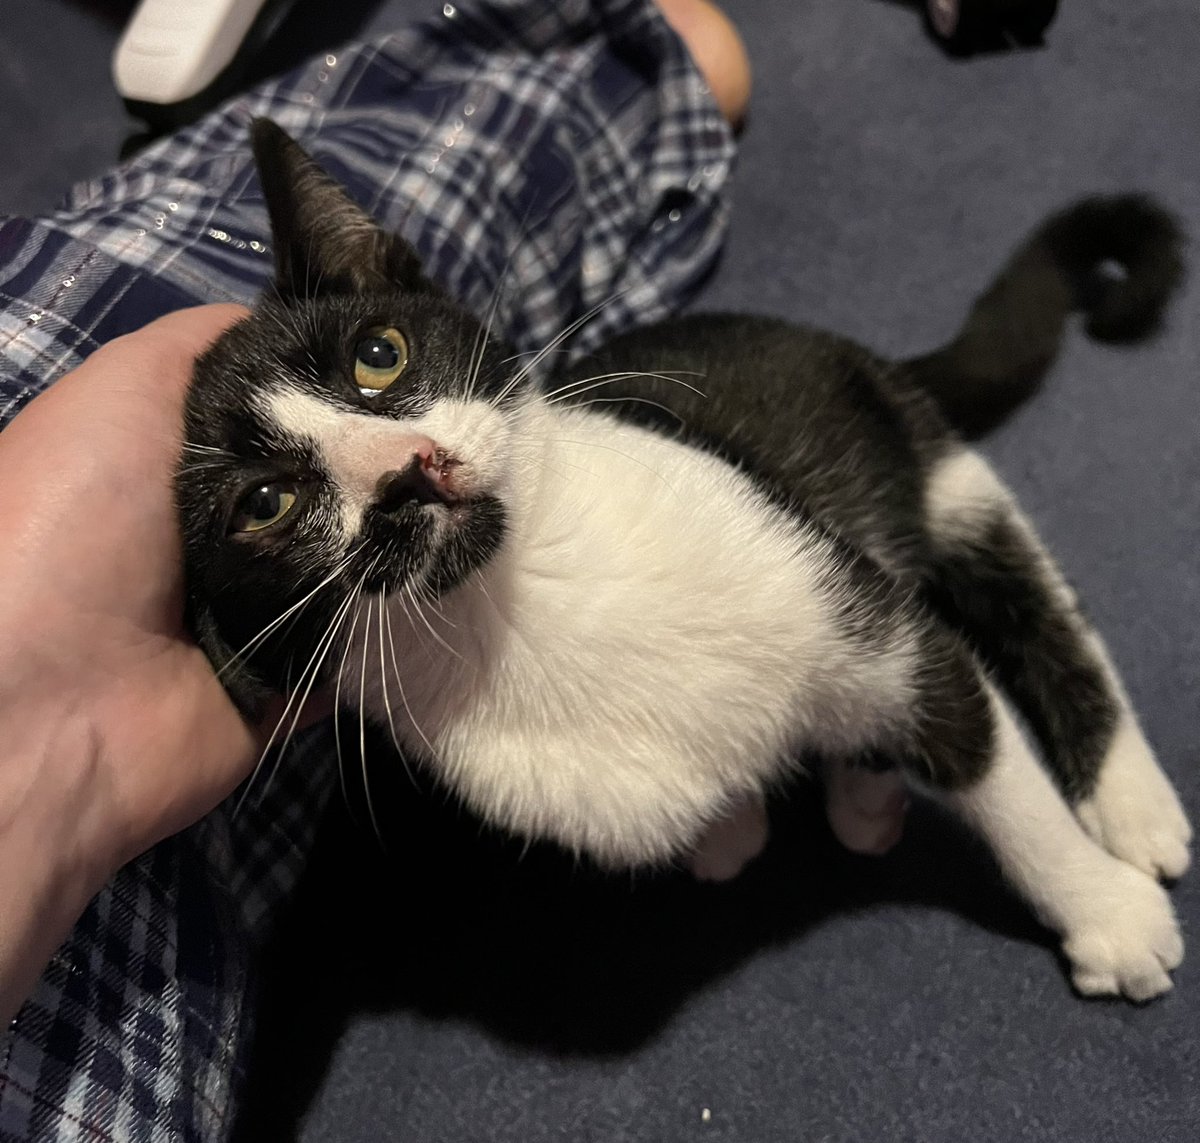 #Sheffield - has anyone lost a black and white kitten? We found her starving in our garden yesterday and ended up taking her in last night after we couldn’t find her family. We will take her to the vet later to get her scanned. In the #Fulwood area. @HelpSheffield